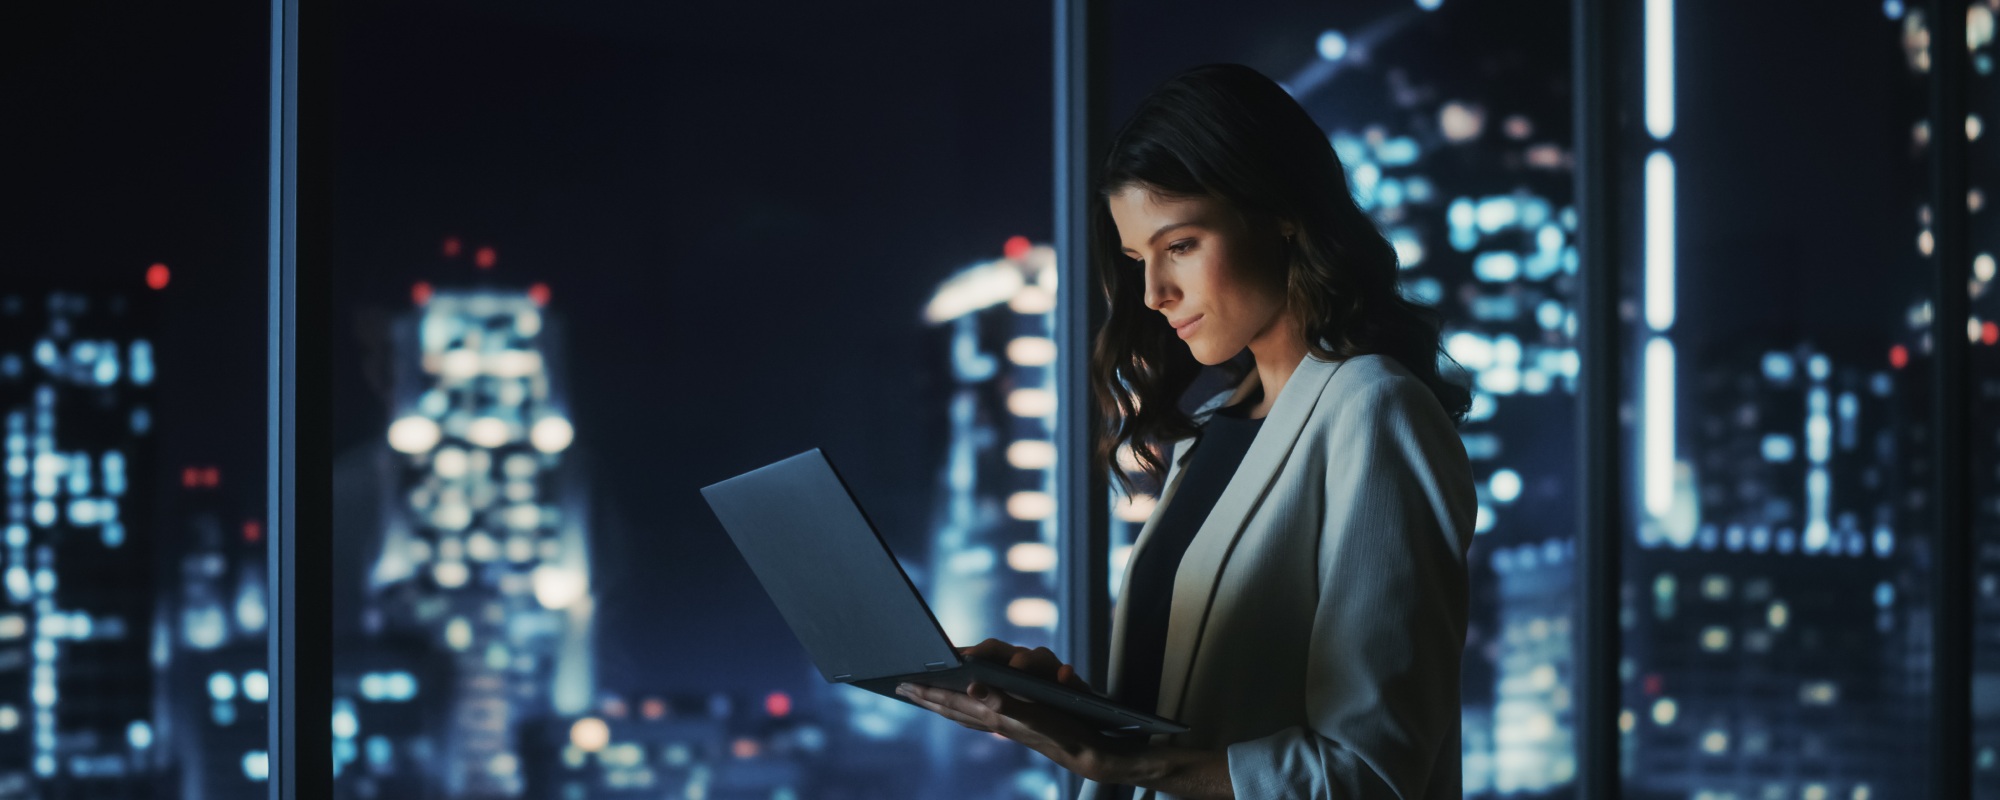 Woman on her laptop in an office at night